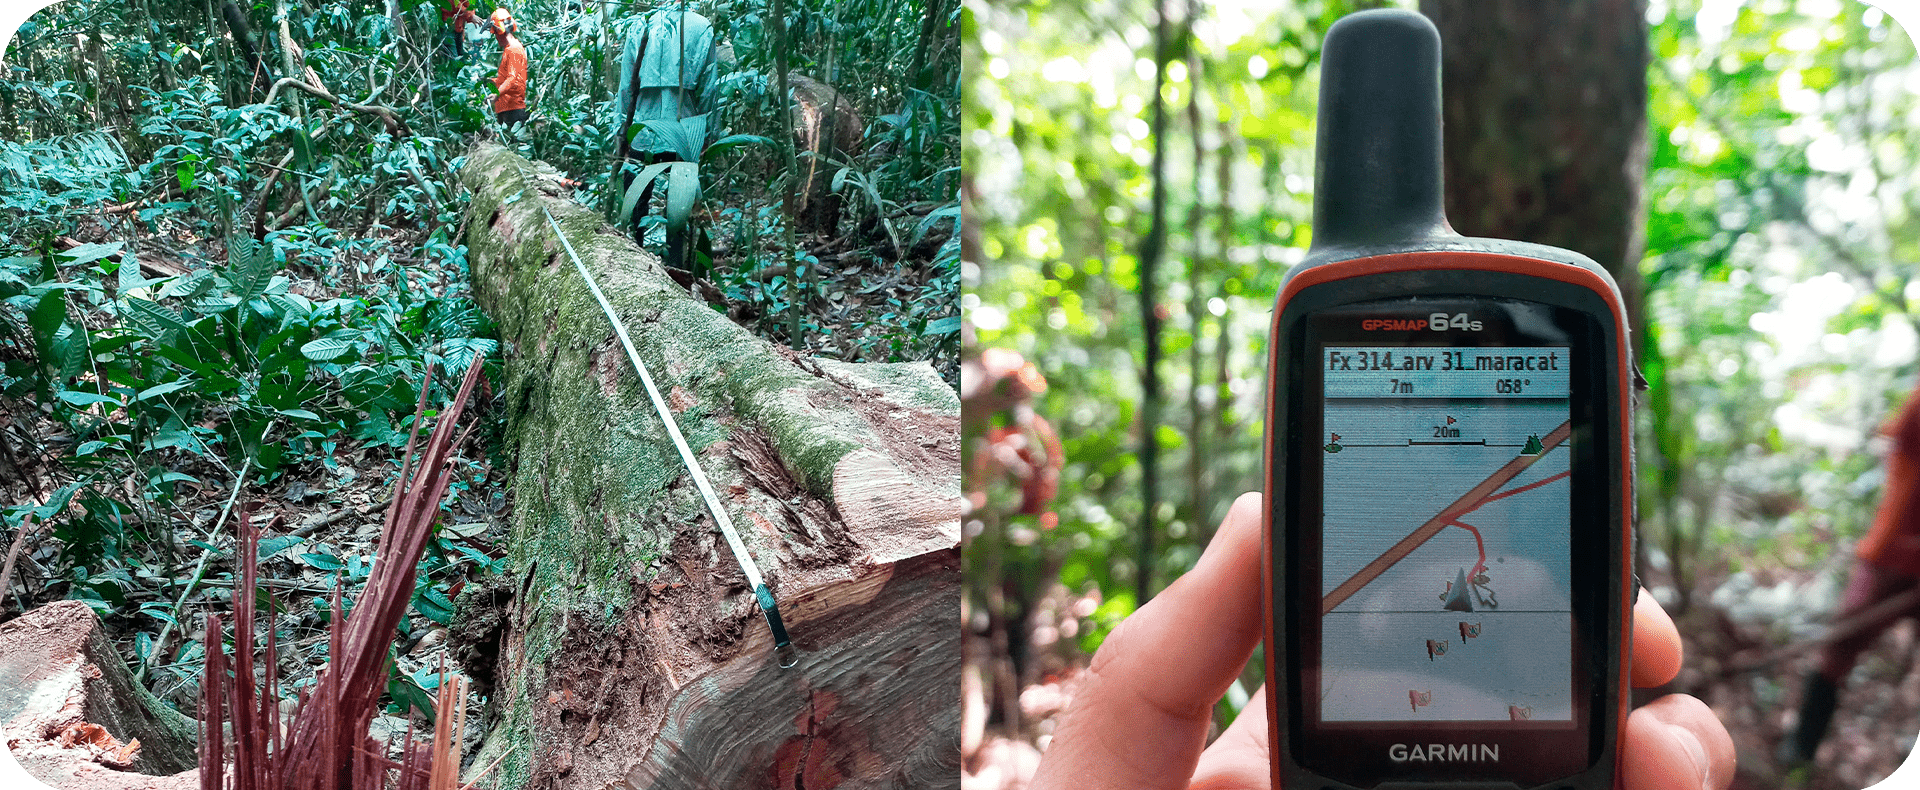 Professionals taking stock of harvested species and using GPS to locate the species to be managed in the Manoa REDD+ Project area.